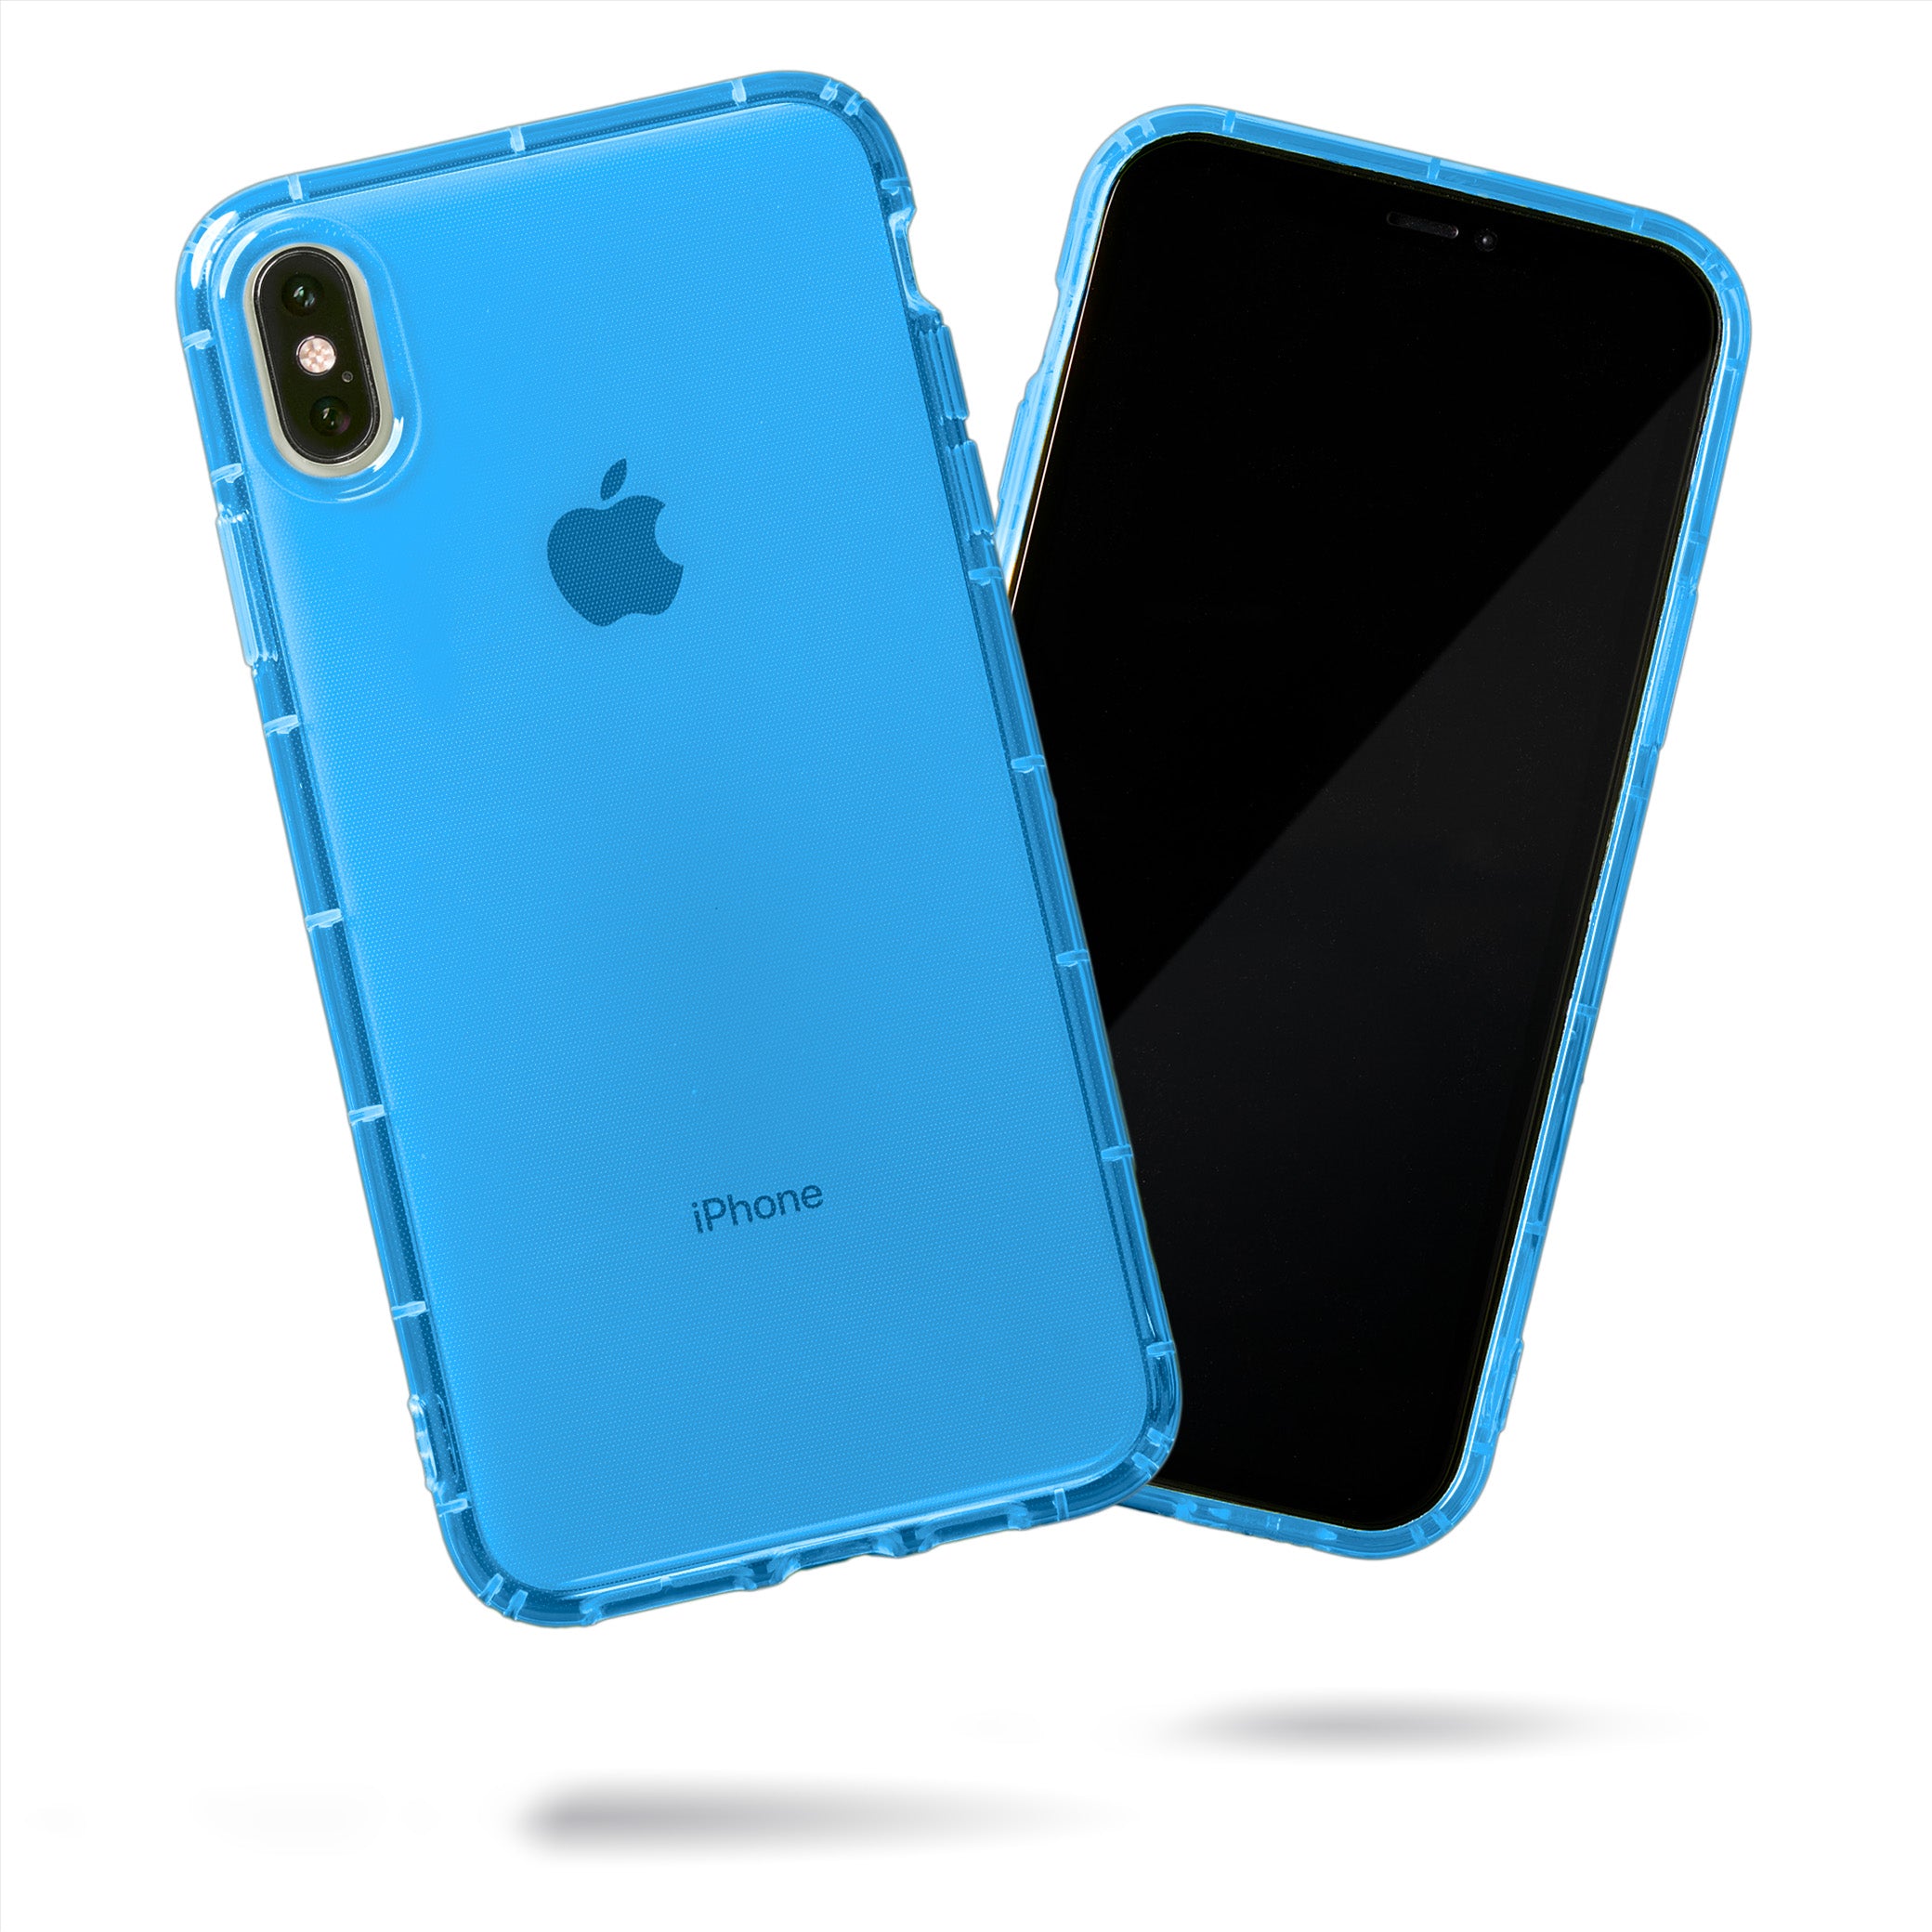 Highlighter Case for iPhone Xs Max - Elevated Azure Blue